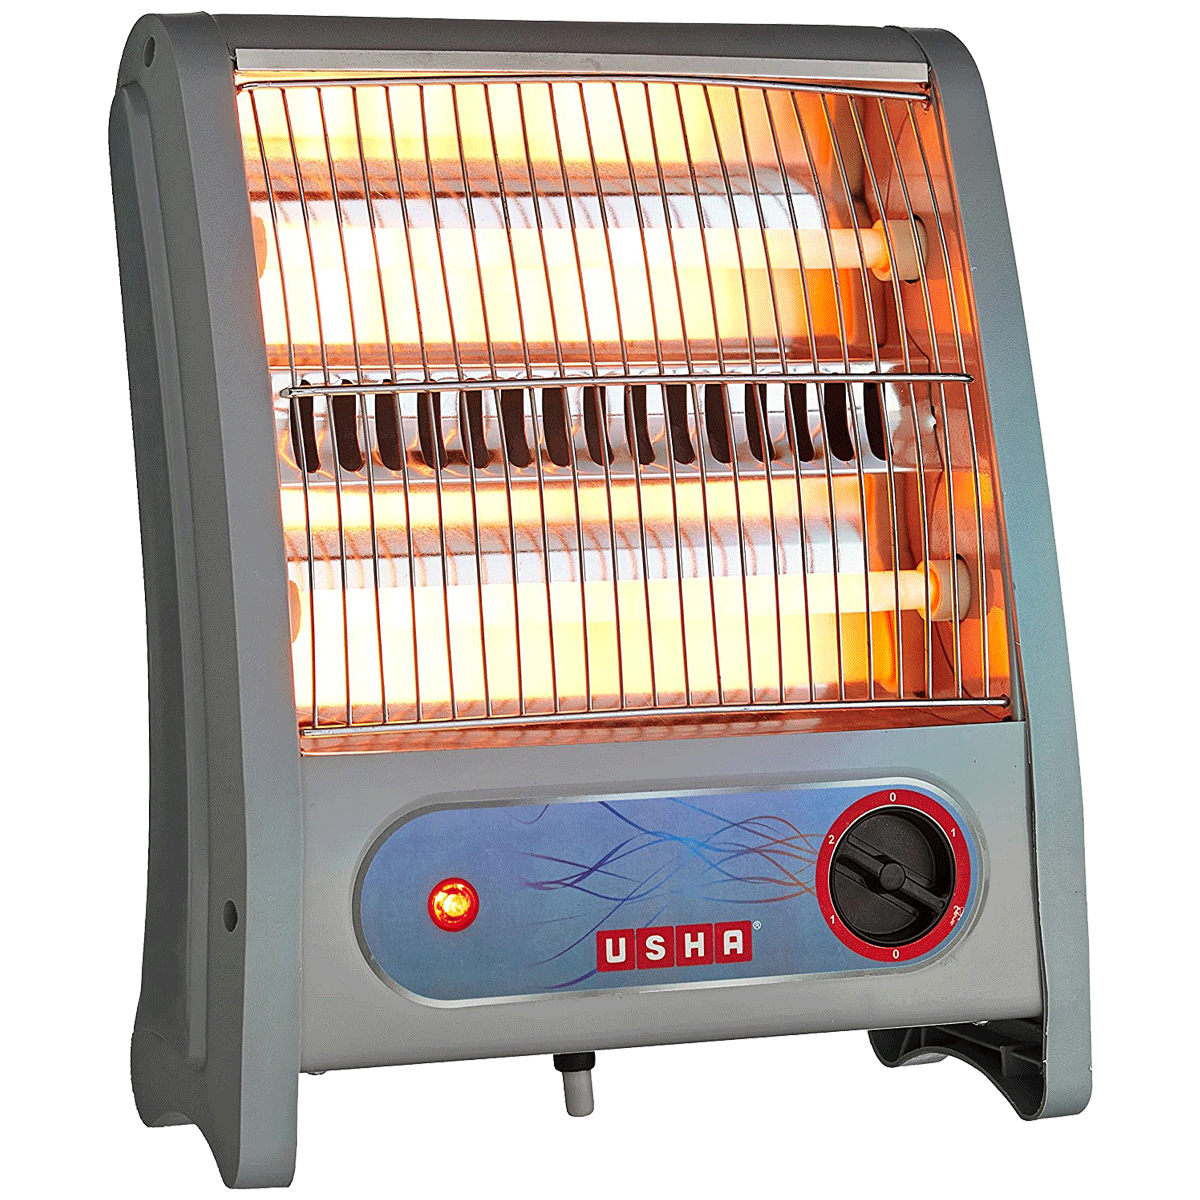 Usha 800 Watts Quartz Glass Tube Room Heater (Safety Tip Over Protection, QH 3002, Silver)_1